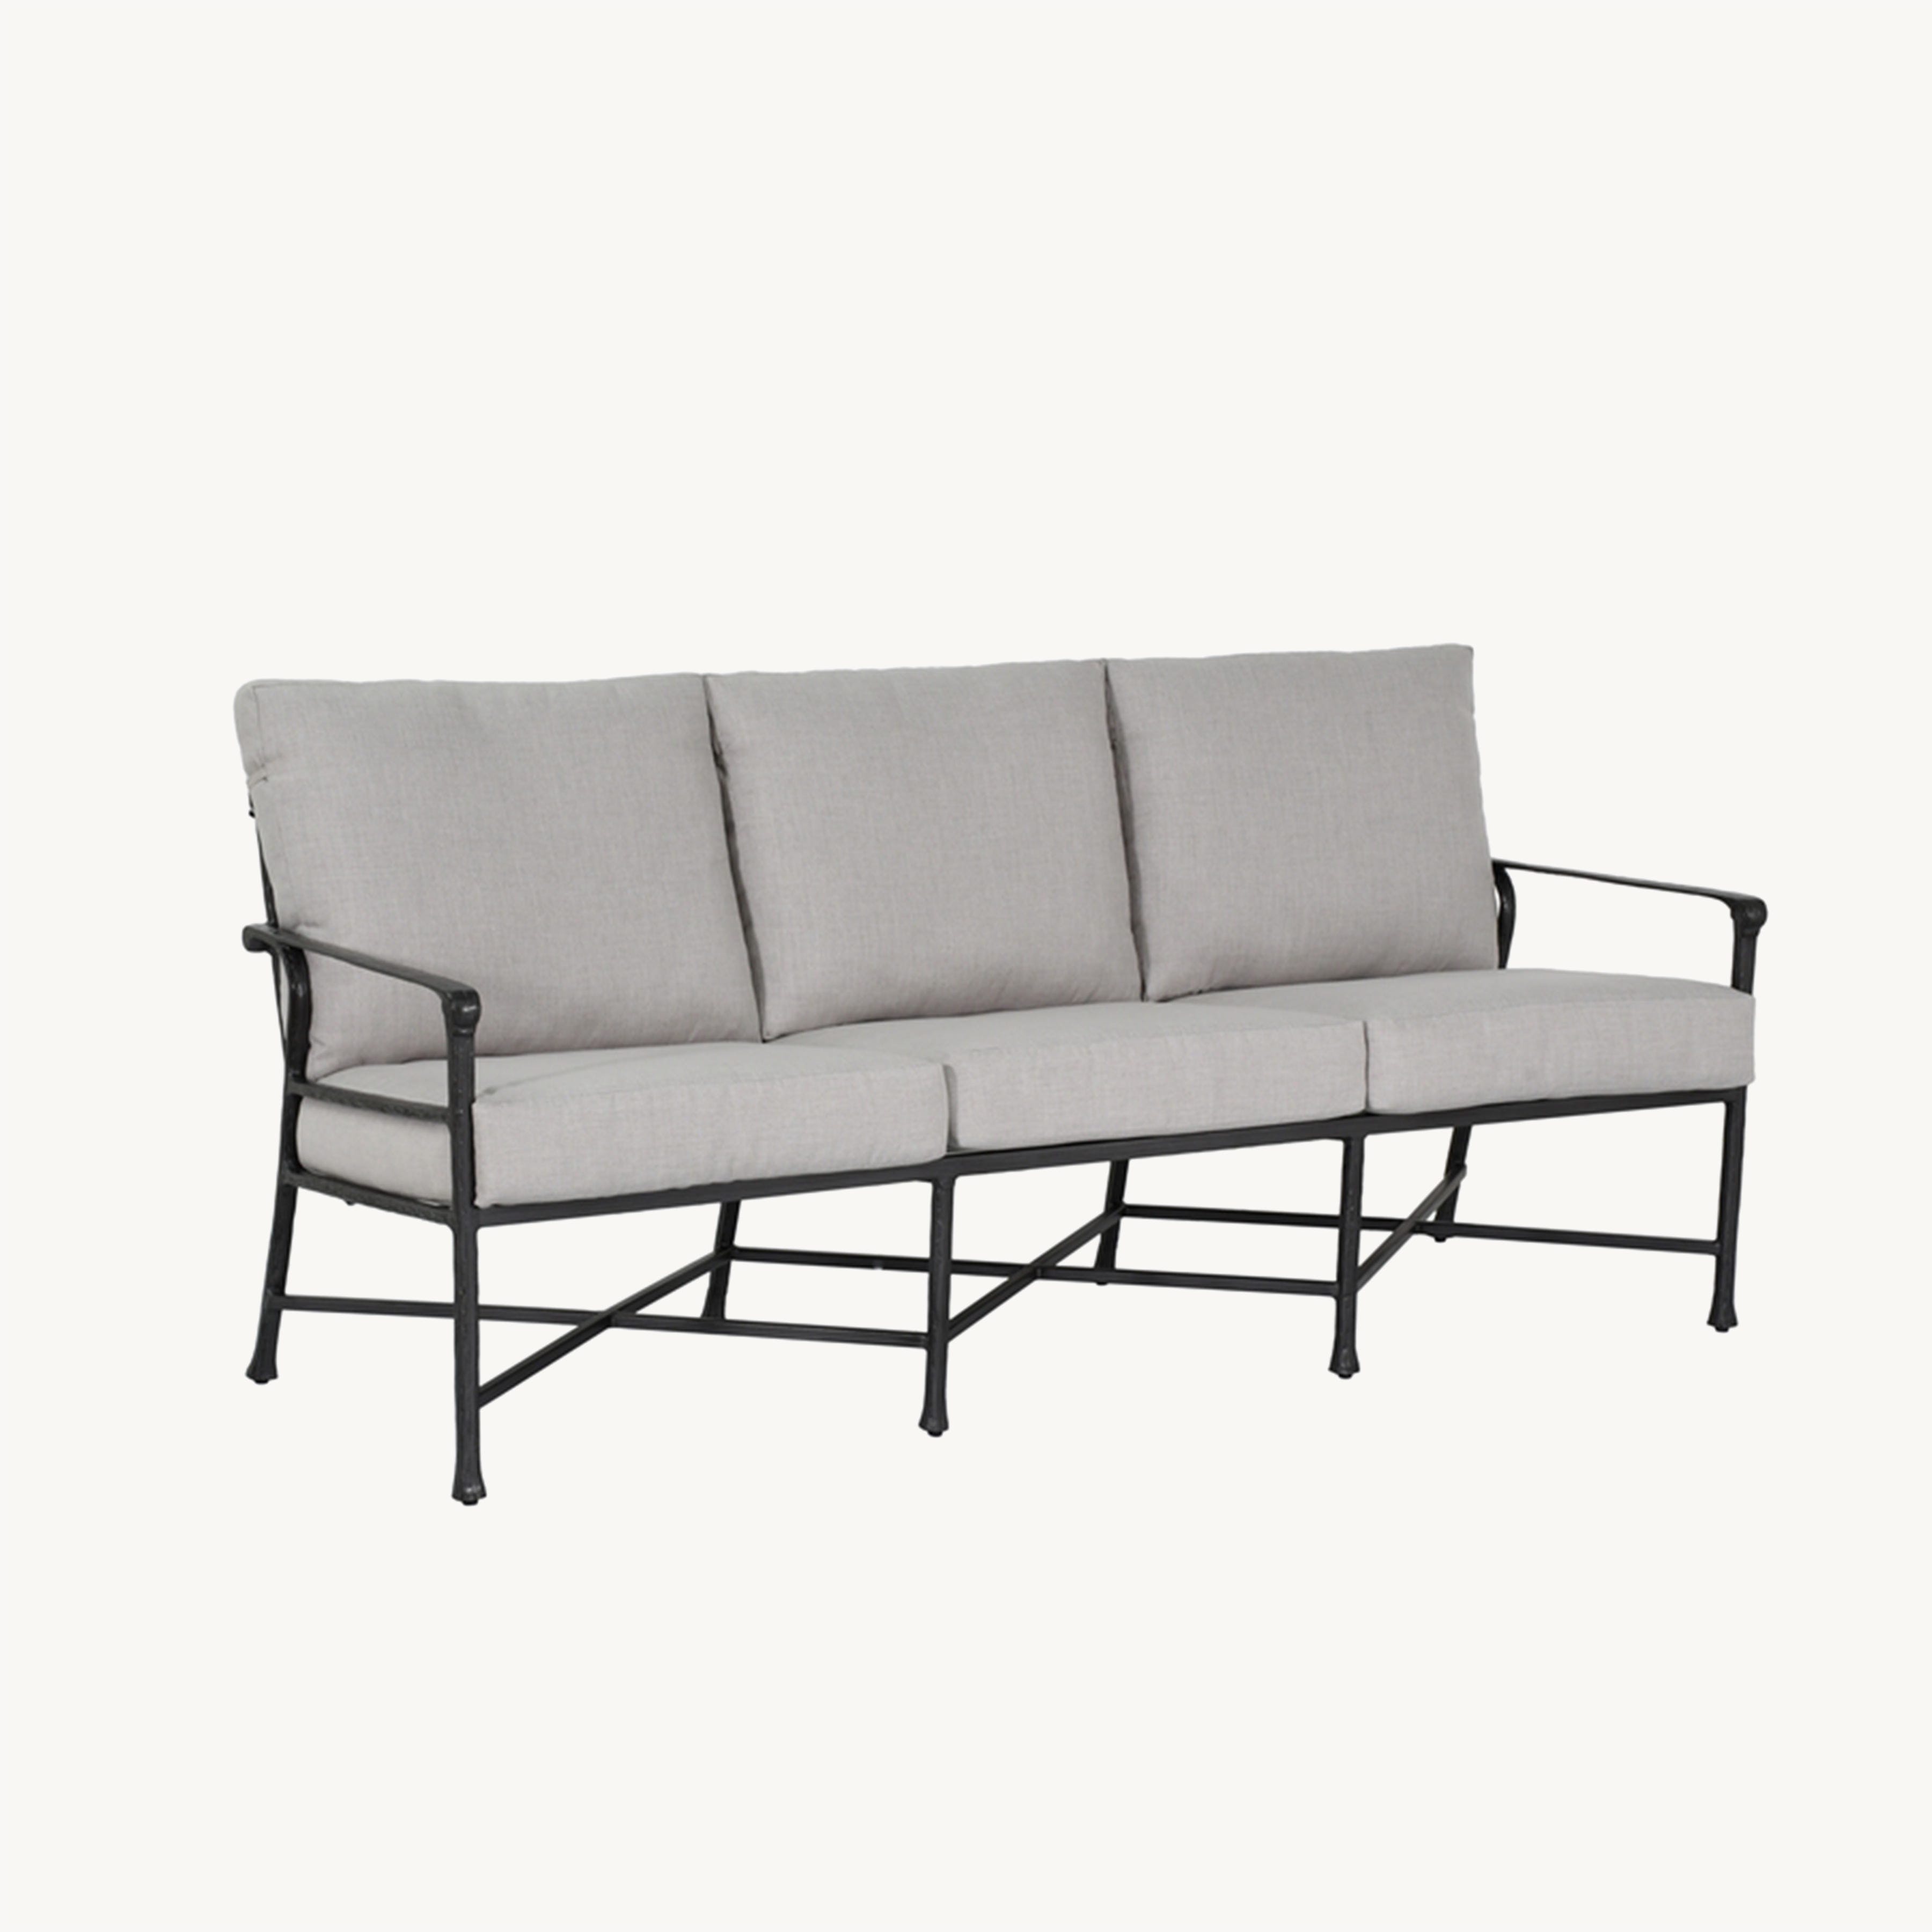 Marquis Cushioned Sofa By Castelle